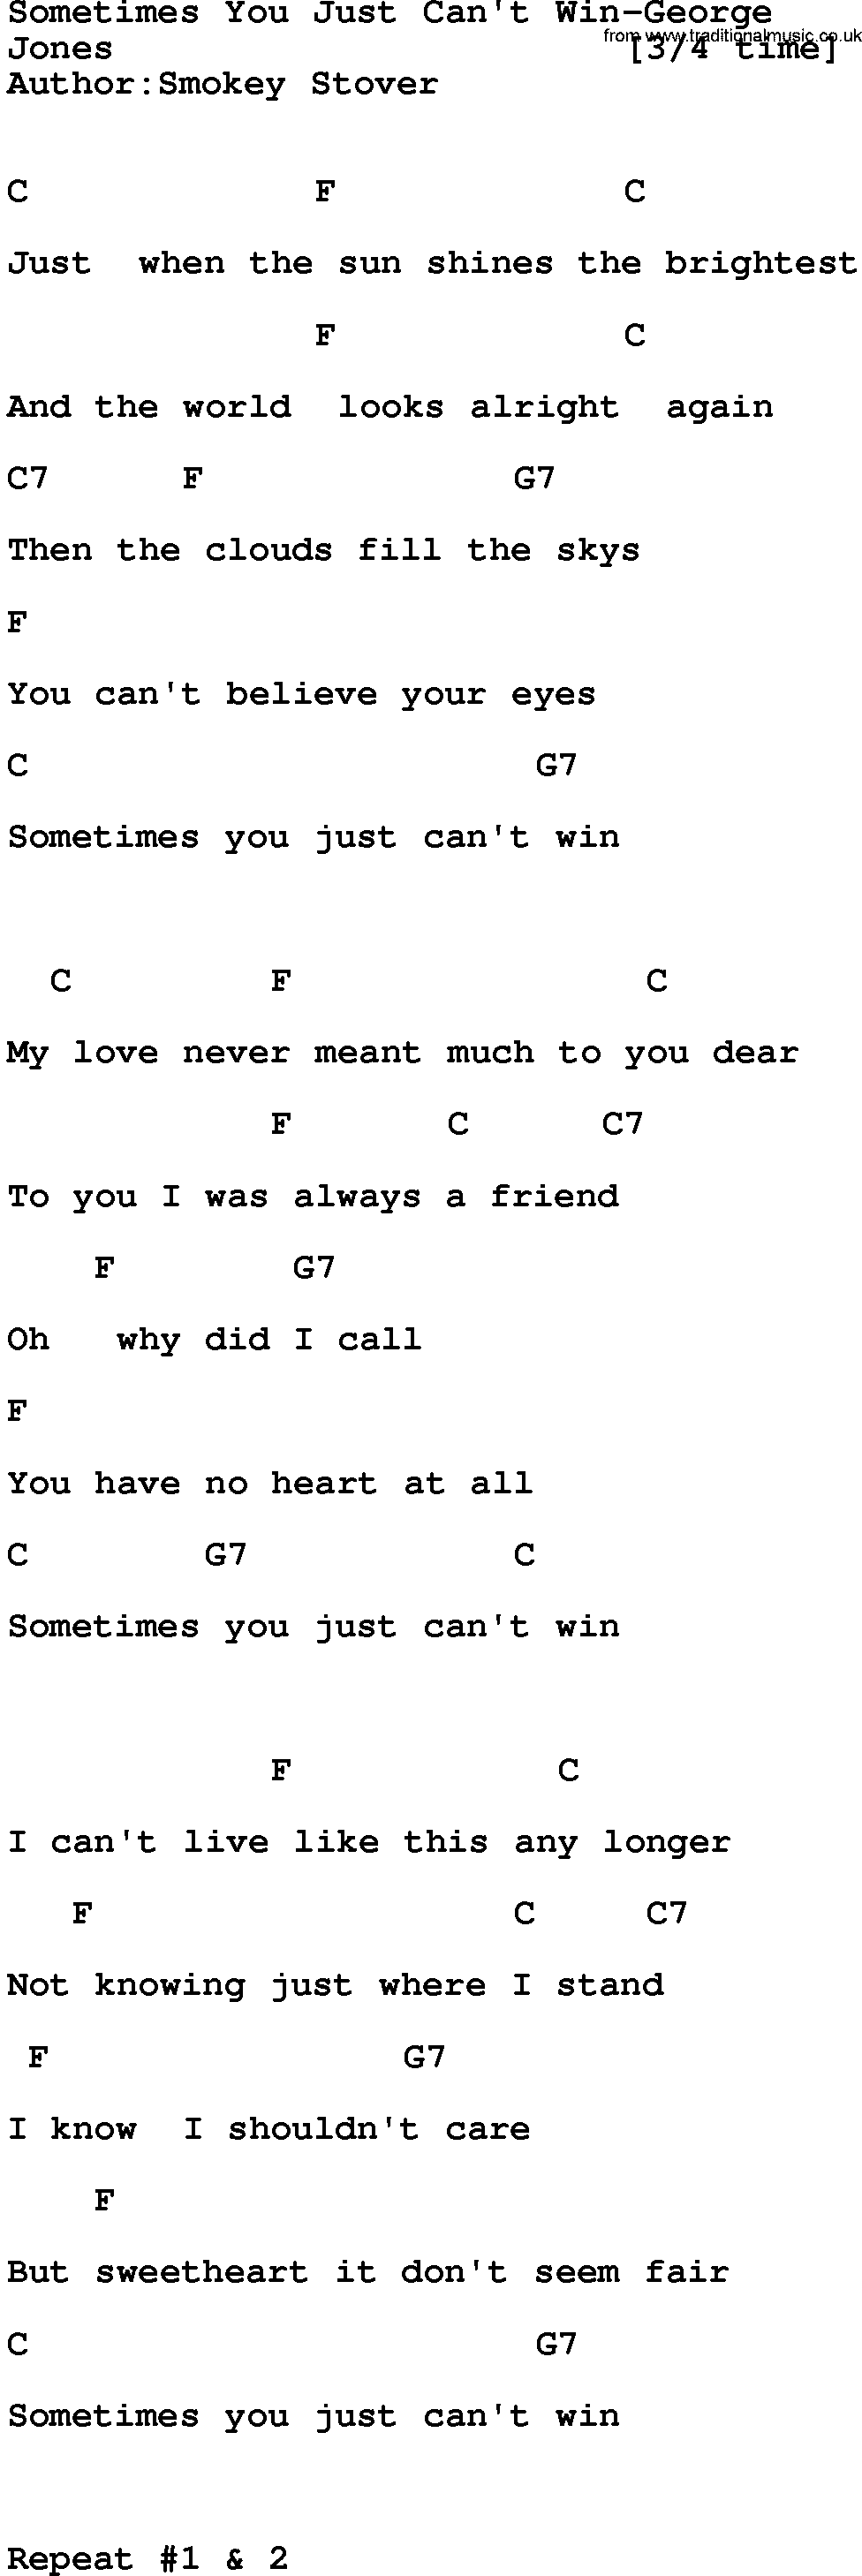 Country music song: Sometimes You Just Can't Win-George lyrics and chords